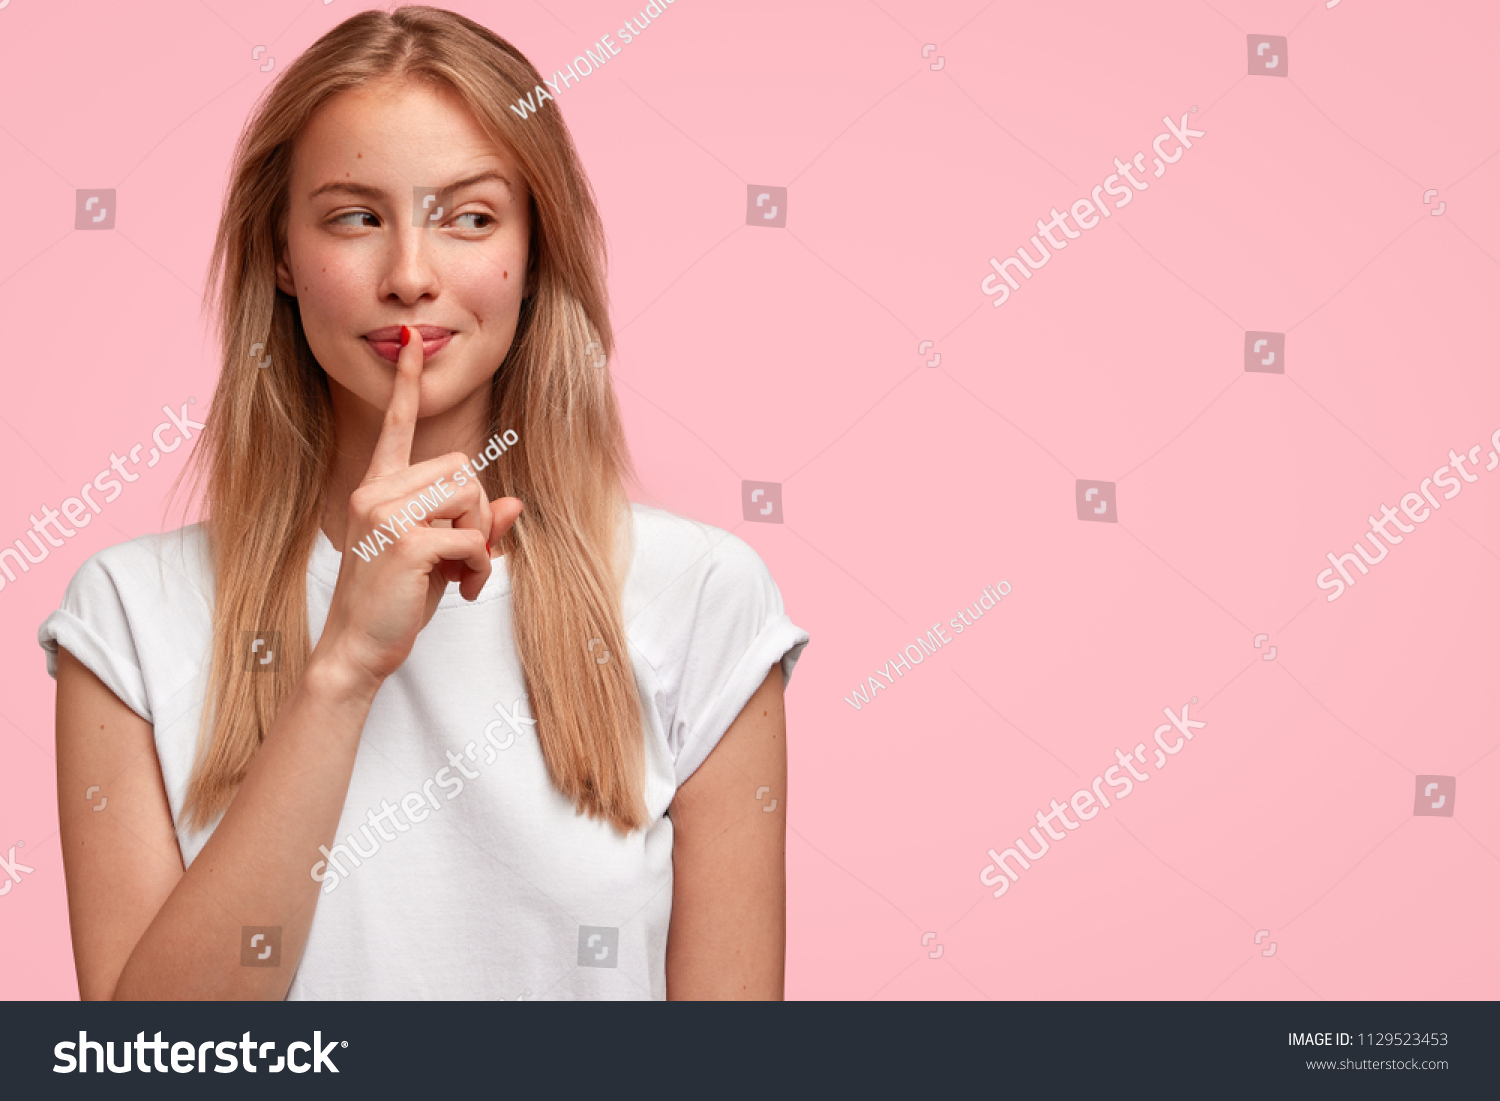 Indoor shot of beautiful female looks mysteriously aside, has intriguing look, asks to be quiet, dressed in casual clothes, stands against pink background with blank copy space for your advertisement #1129523453